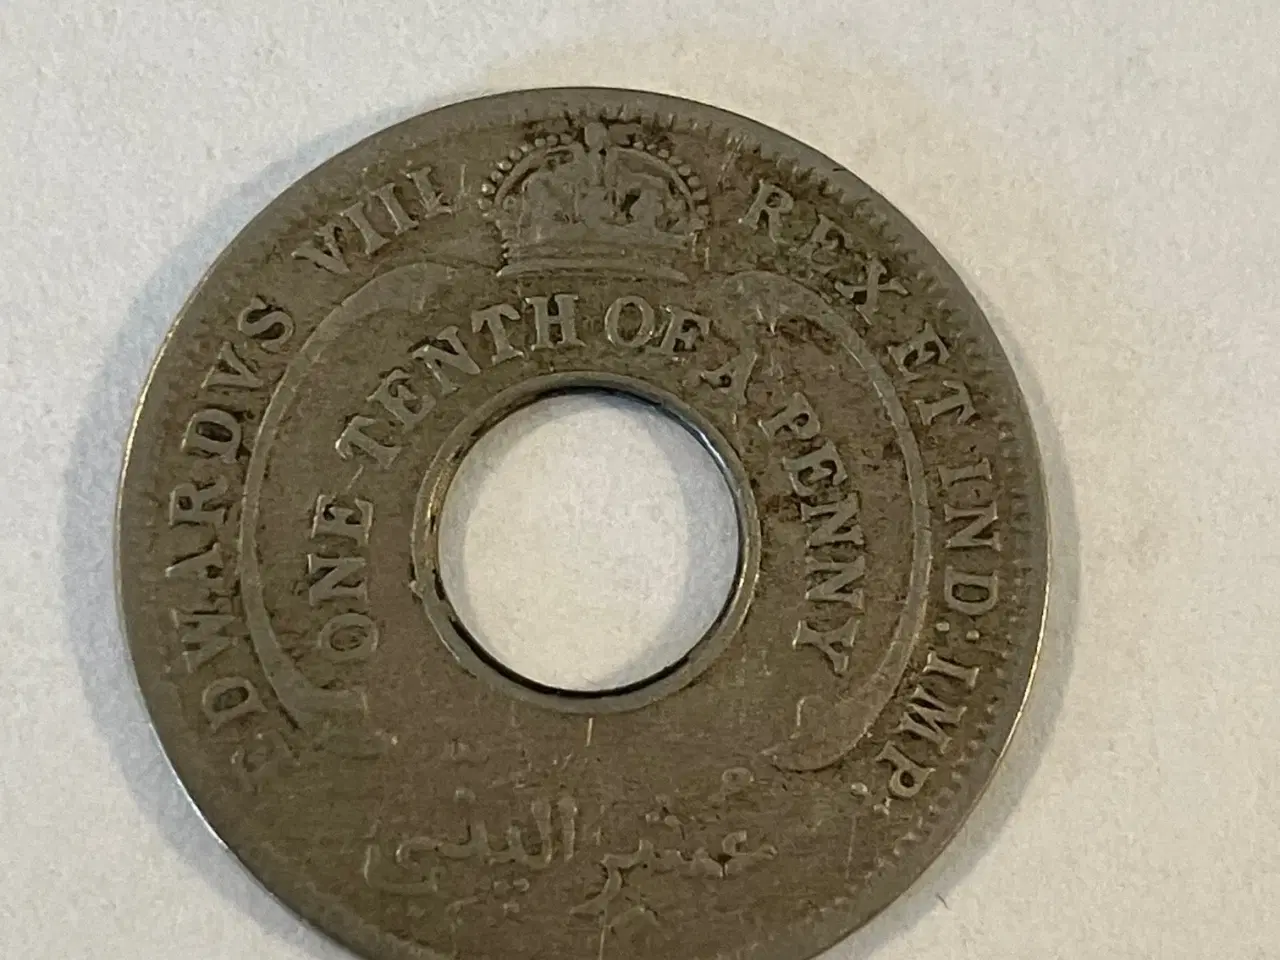 Billede 2 - One tenth of a Penny British West Africa 1936